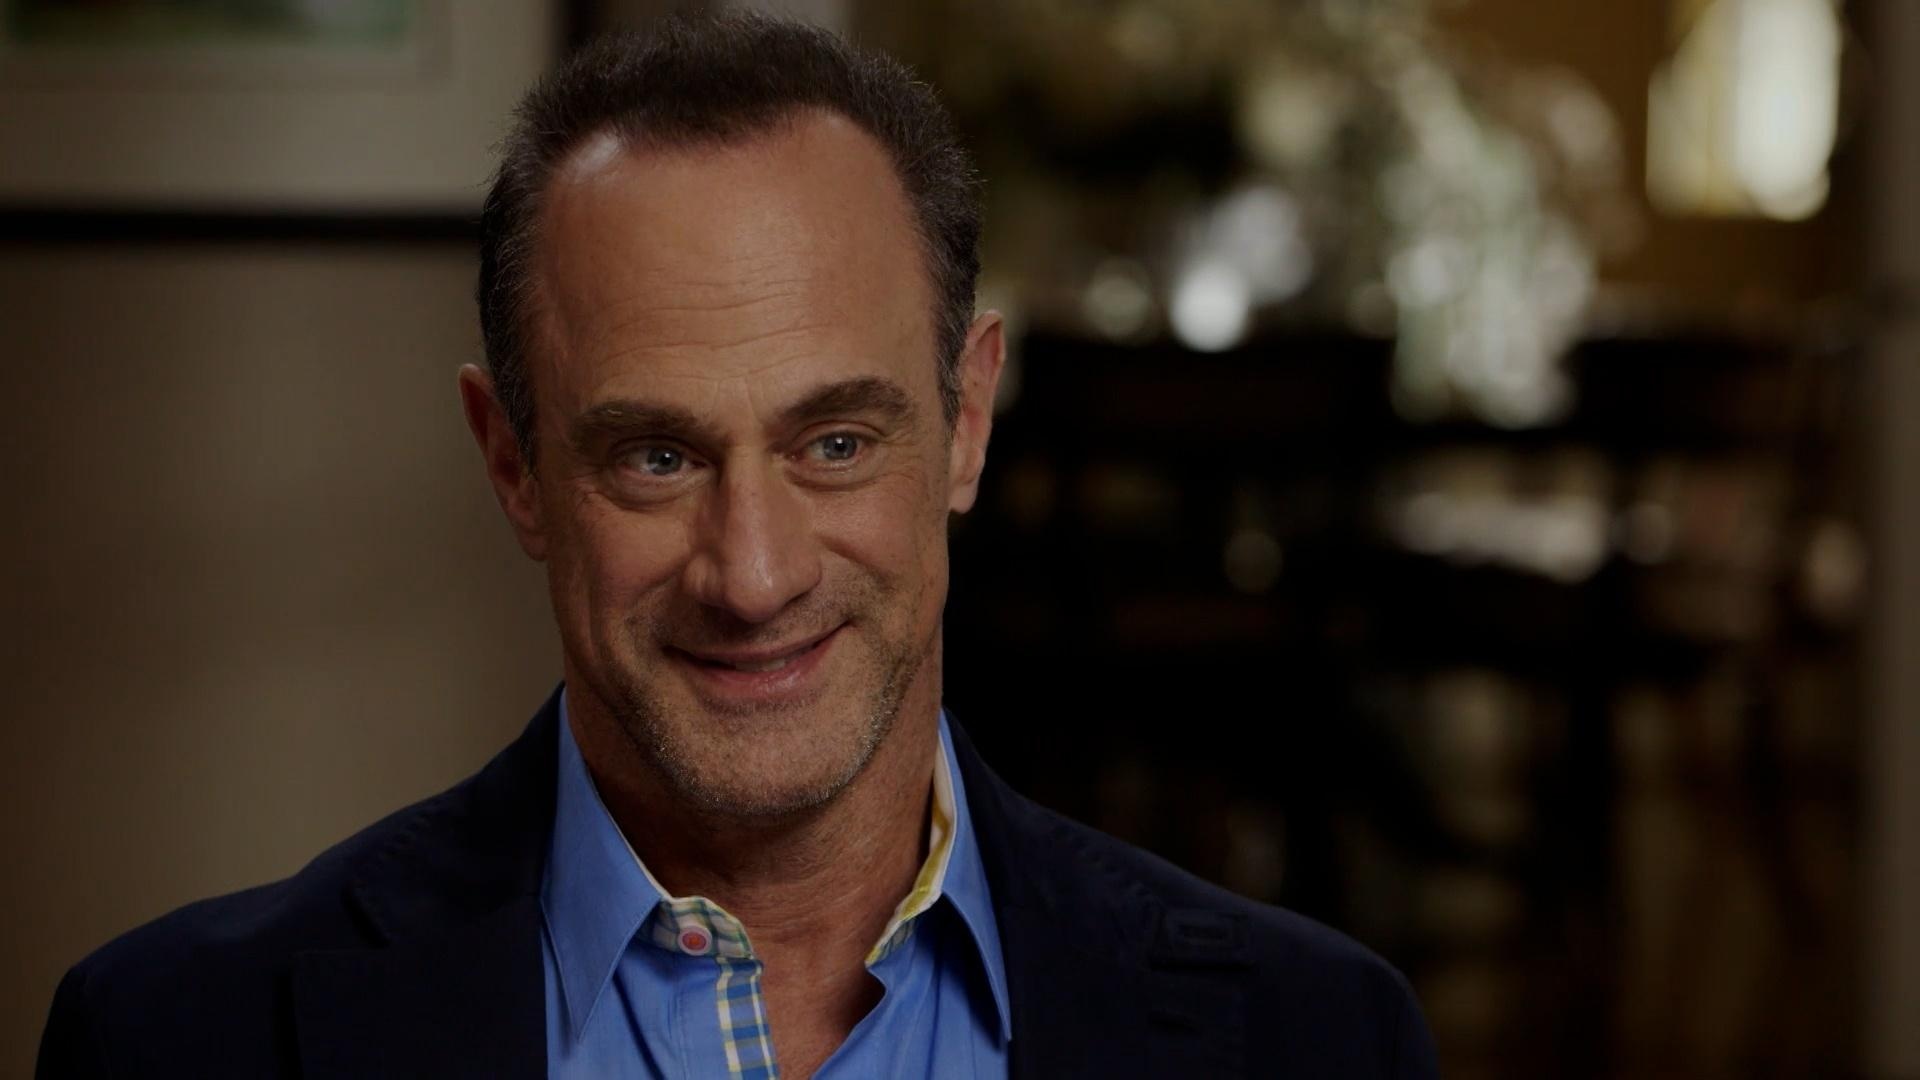 Christopher Meloni, Finding your roots, Hollywood agent journey, PBS episode, 1920x1080 Full HD Desktop